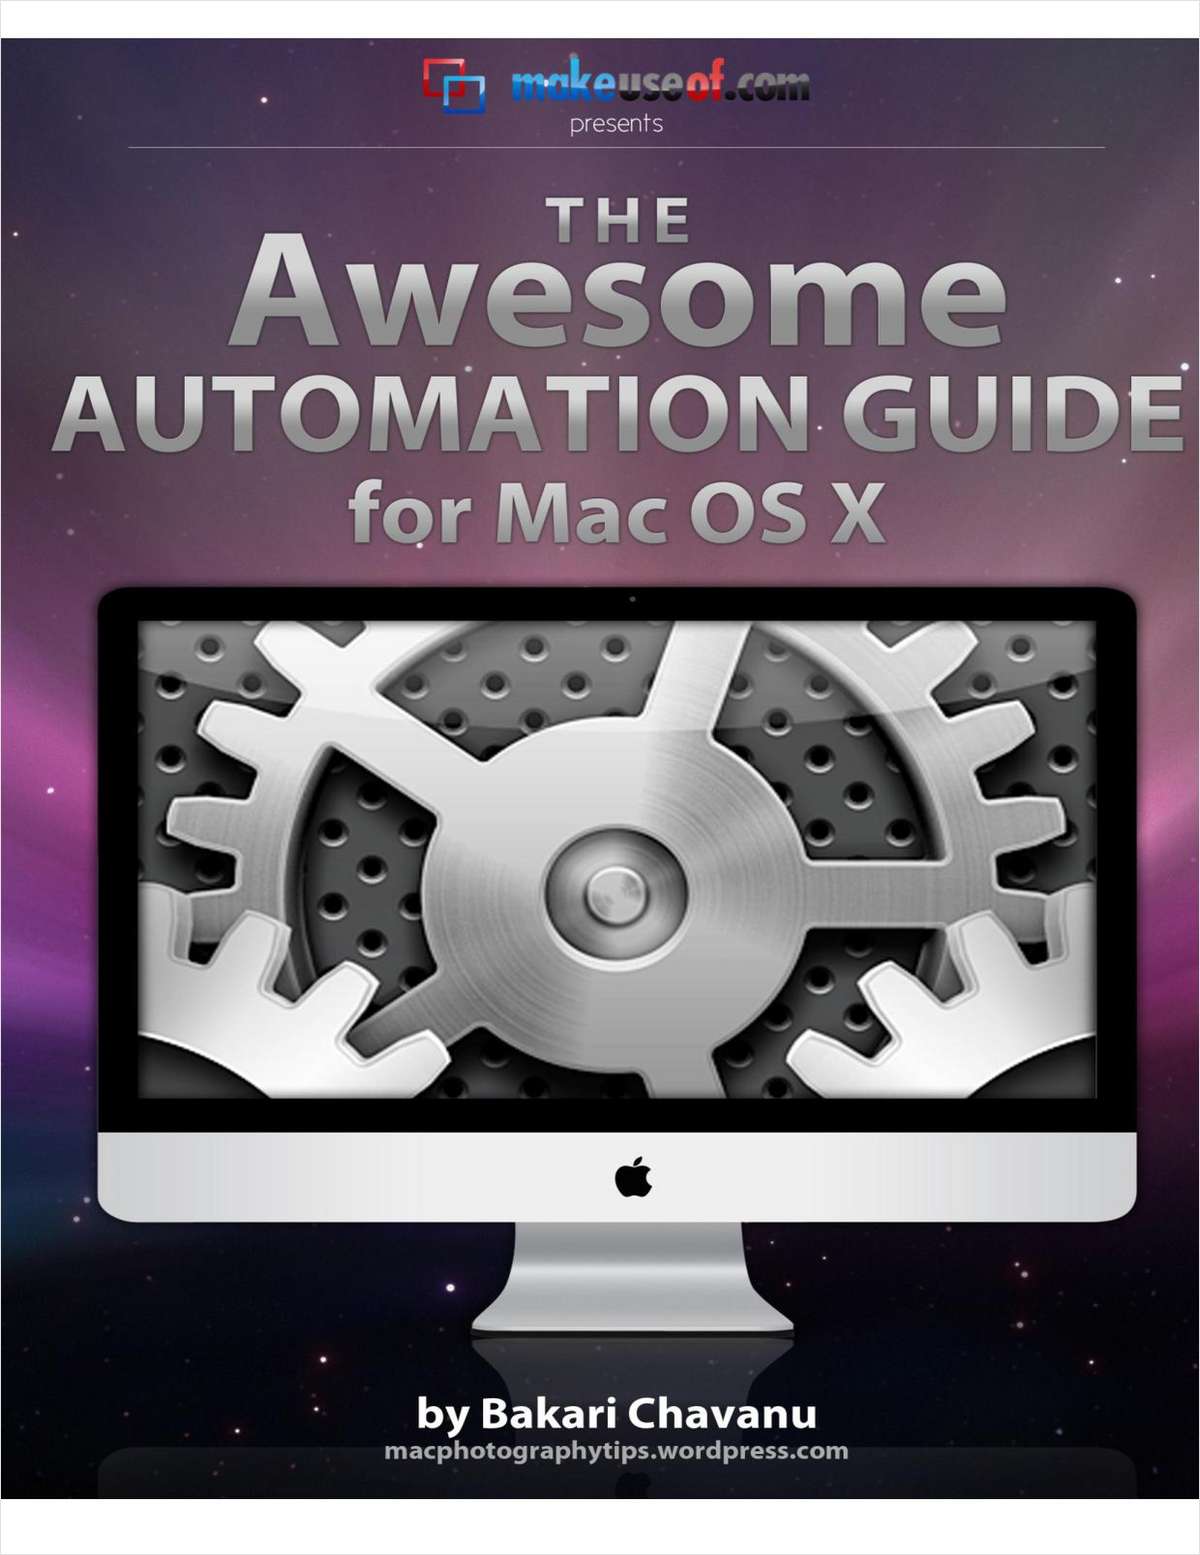 The Awesome Automation Guide for Macs